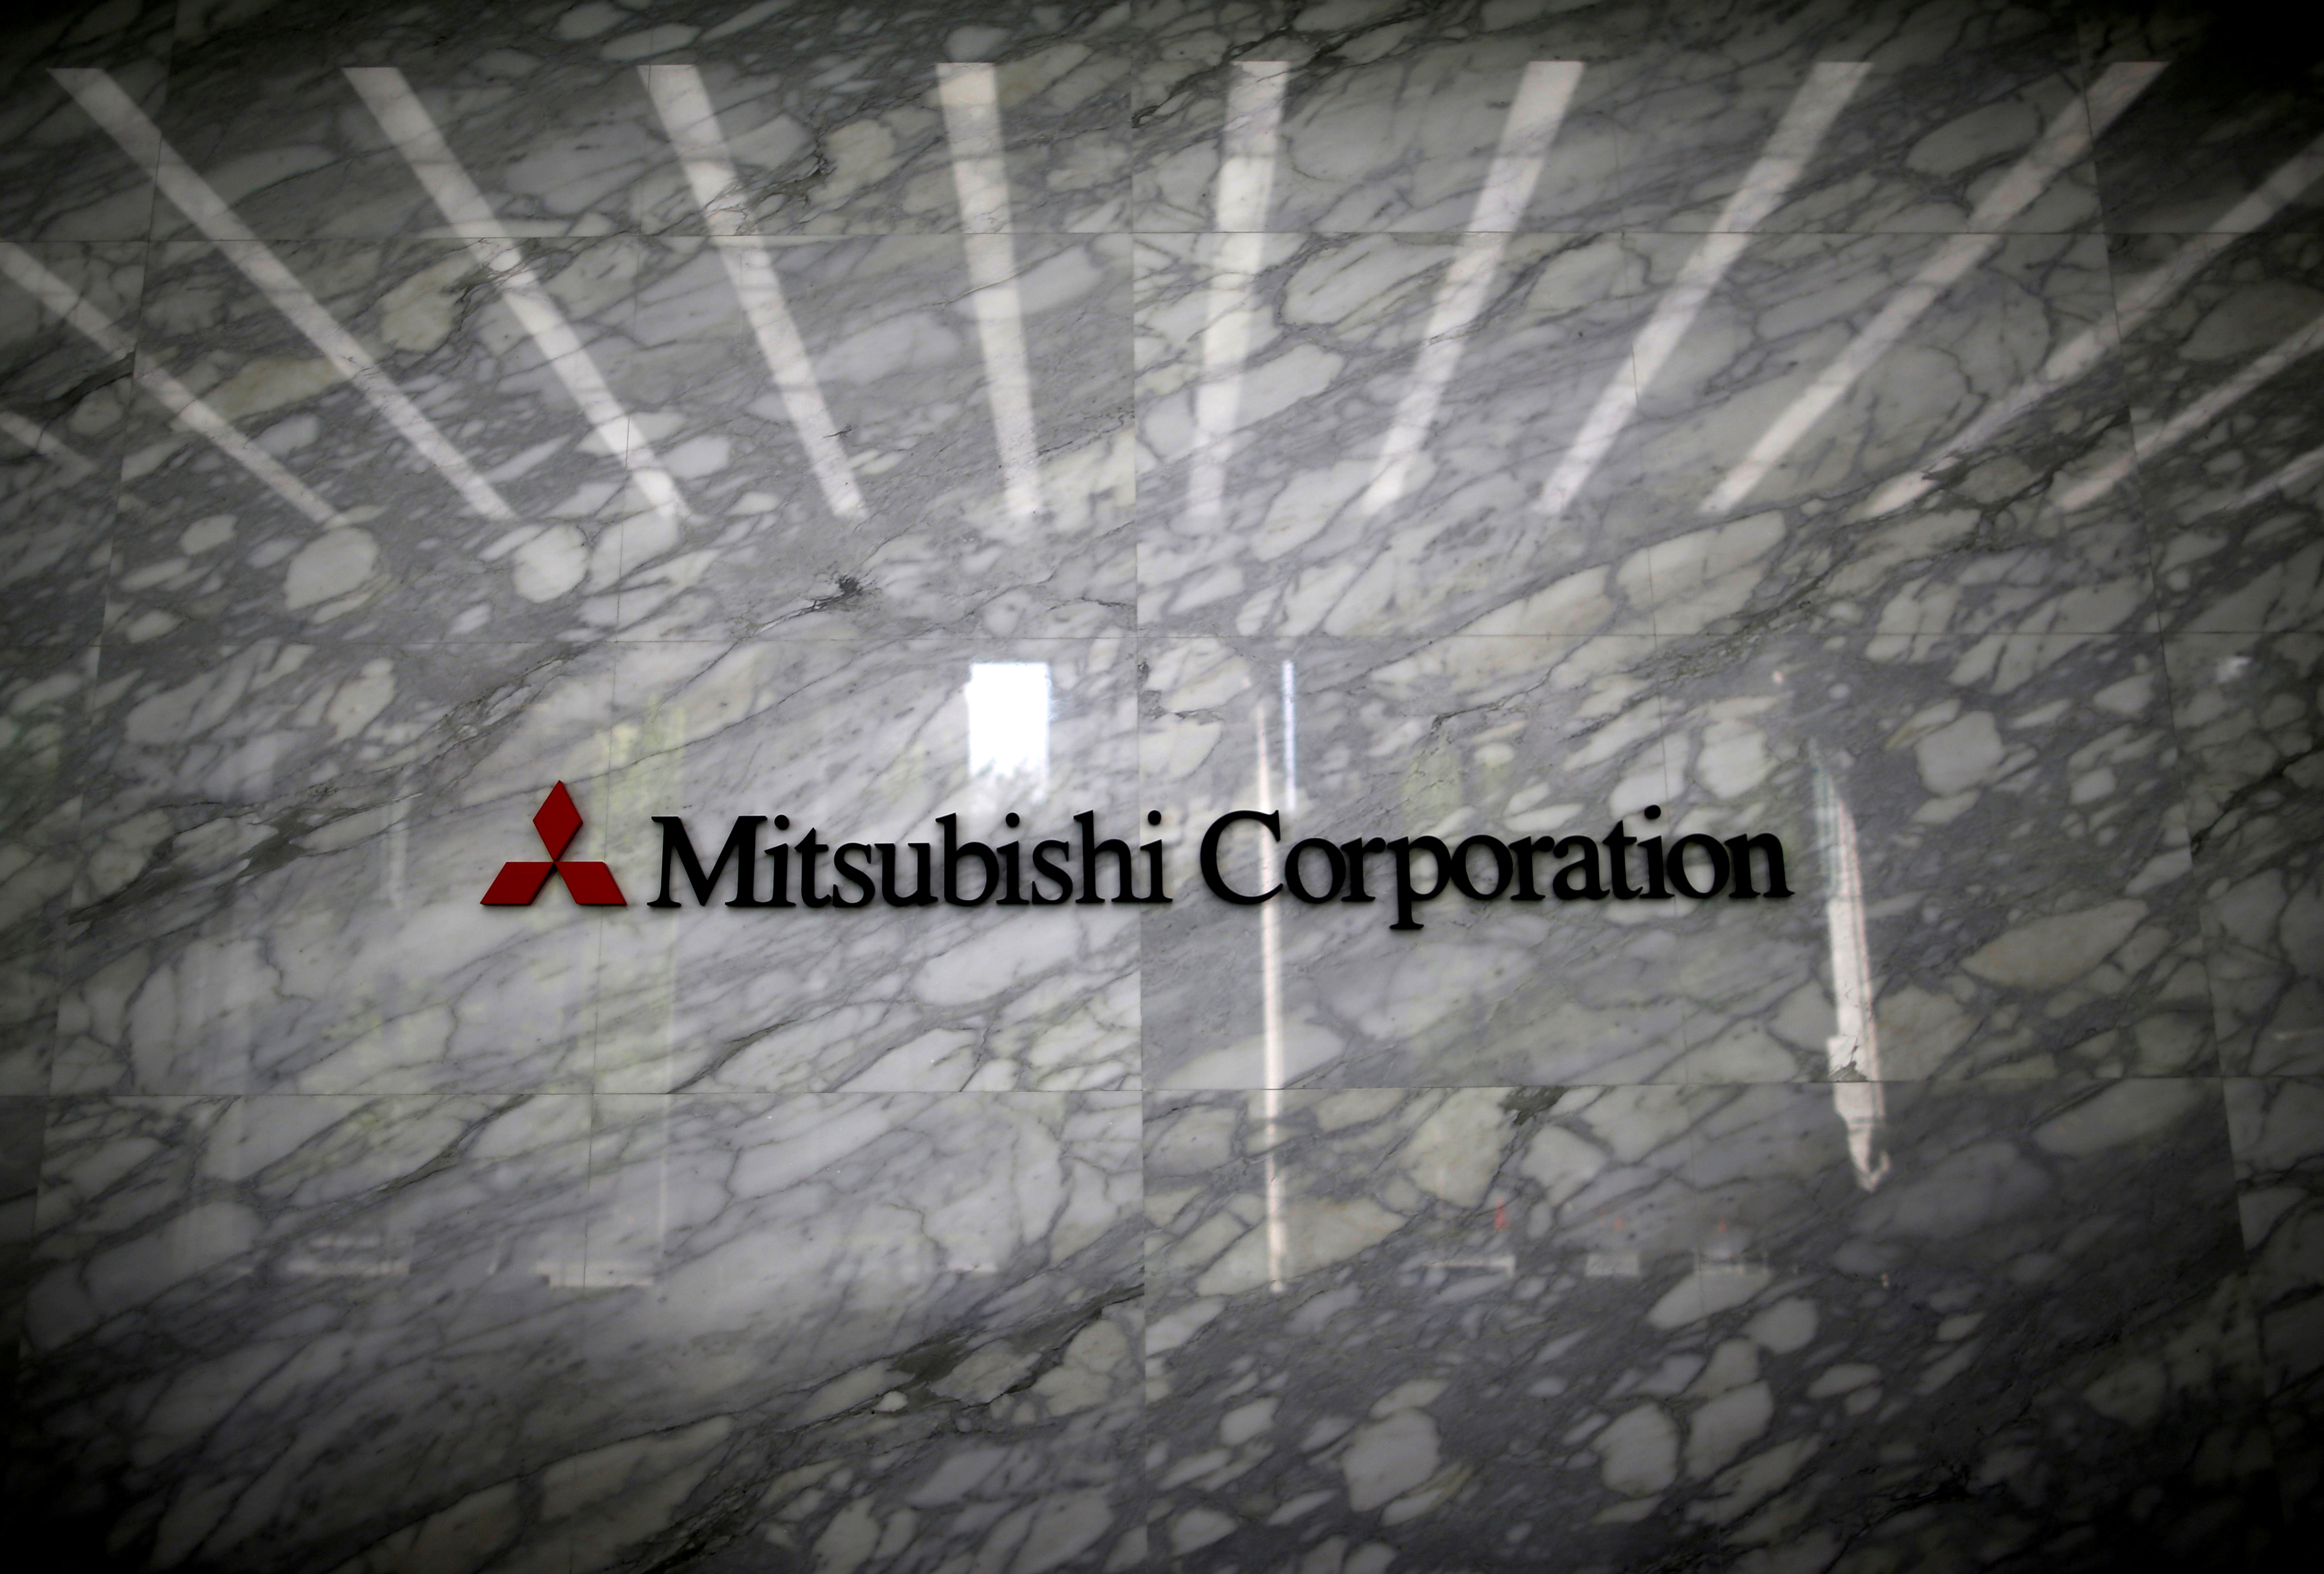 The logo of Mitsubishi Corporation is displayed at the entrance of the company headquarters building in Tokyo